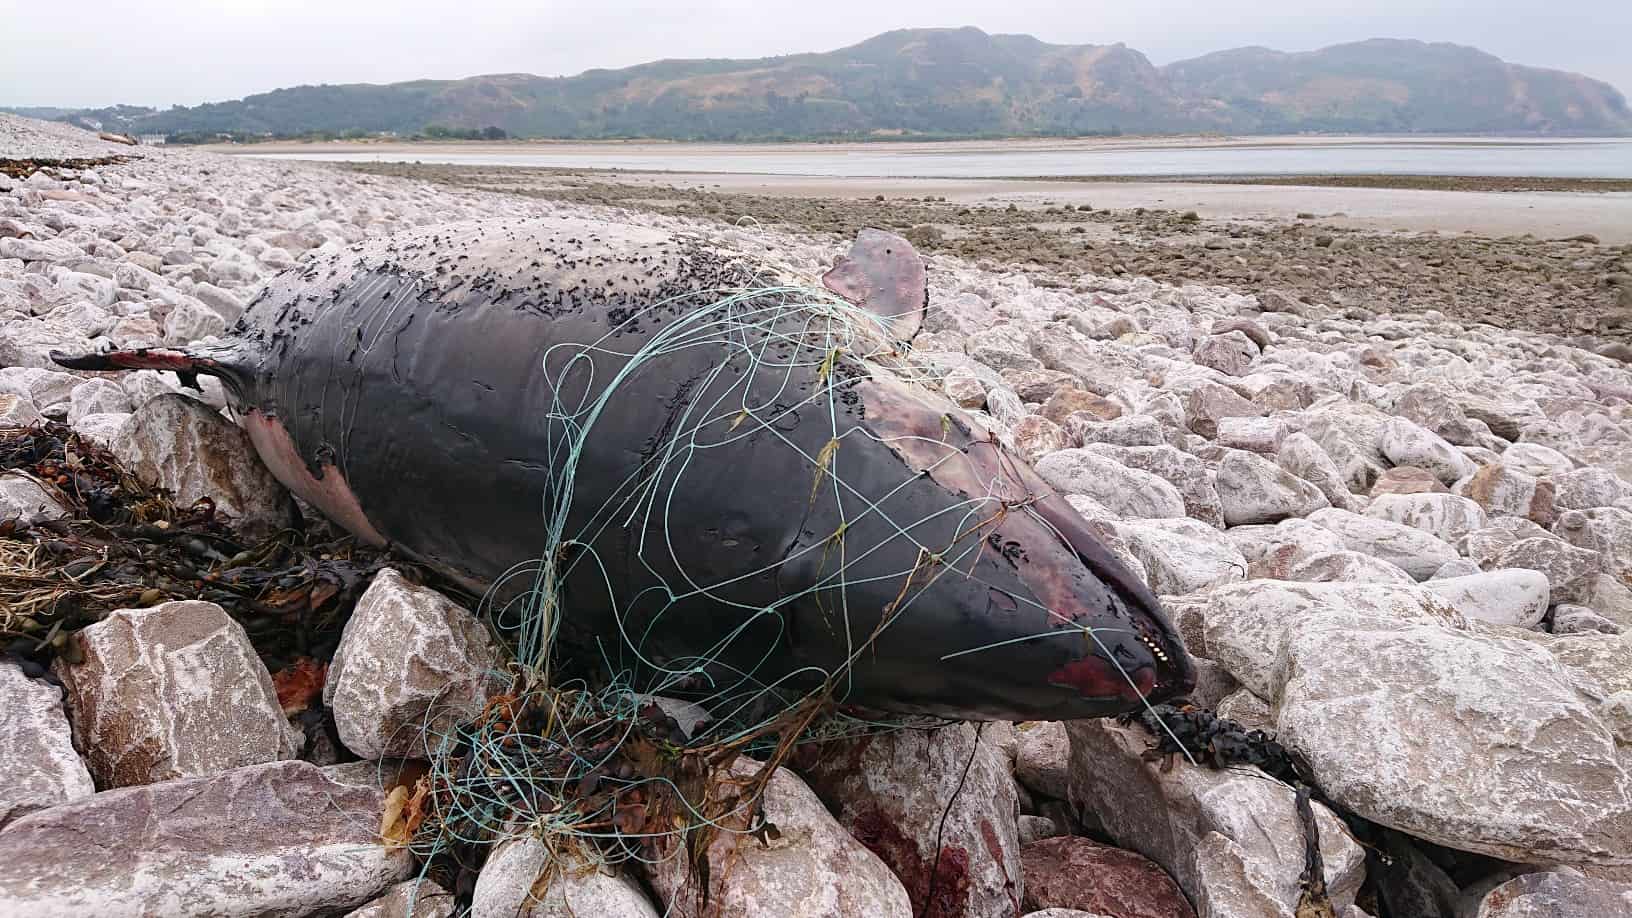 ‘Unseen suffering and death’ – Action urged to prevent fishing gear deaths of porpoises, dolphins and whales